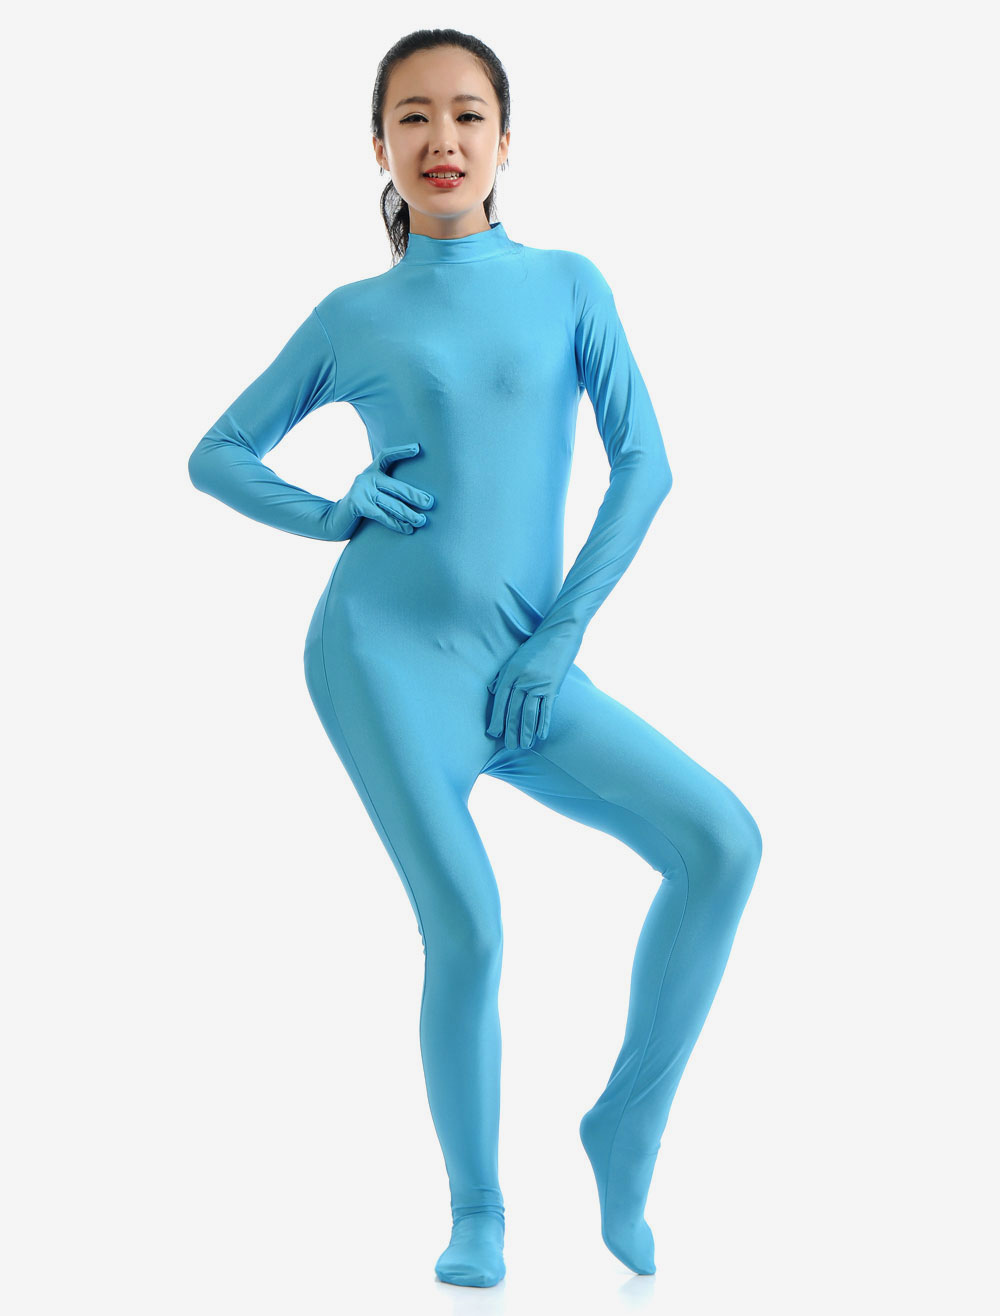 Catsuit Pvc Catsuit Sexy Catsuit Shiny Catsuit Long Sleeves Catsuit Full Body Pvc Catsuit